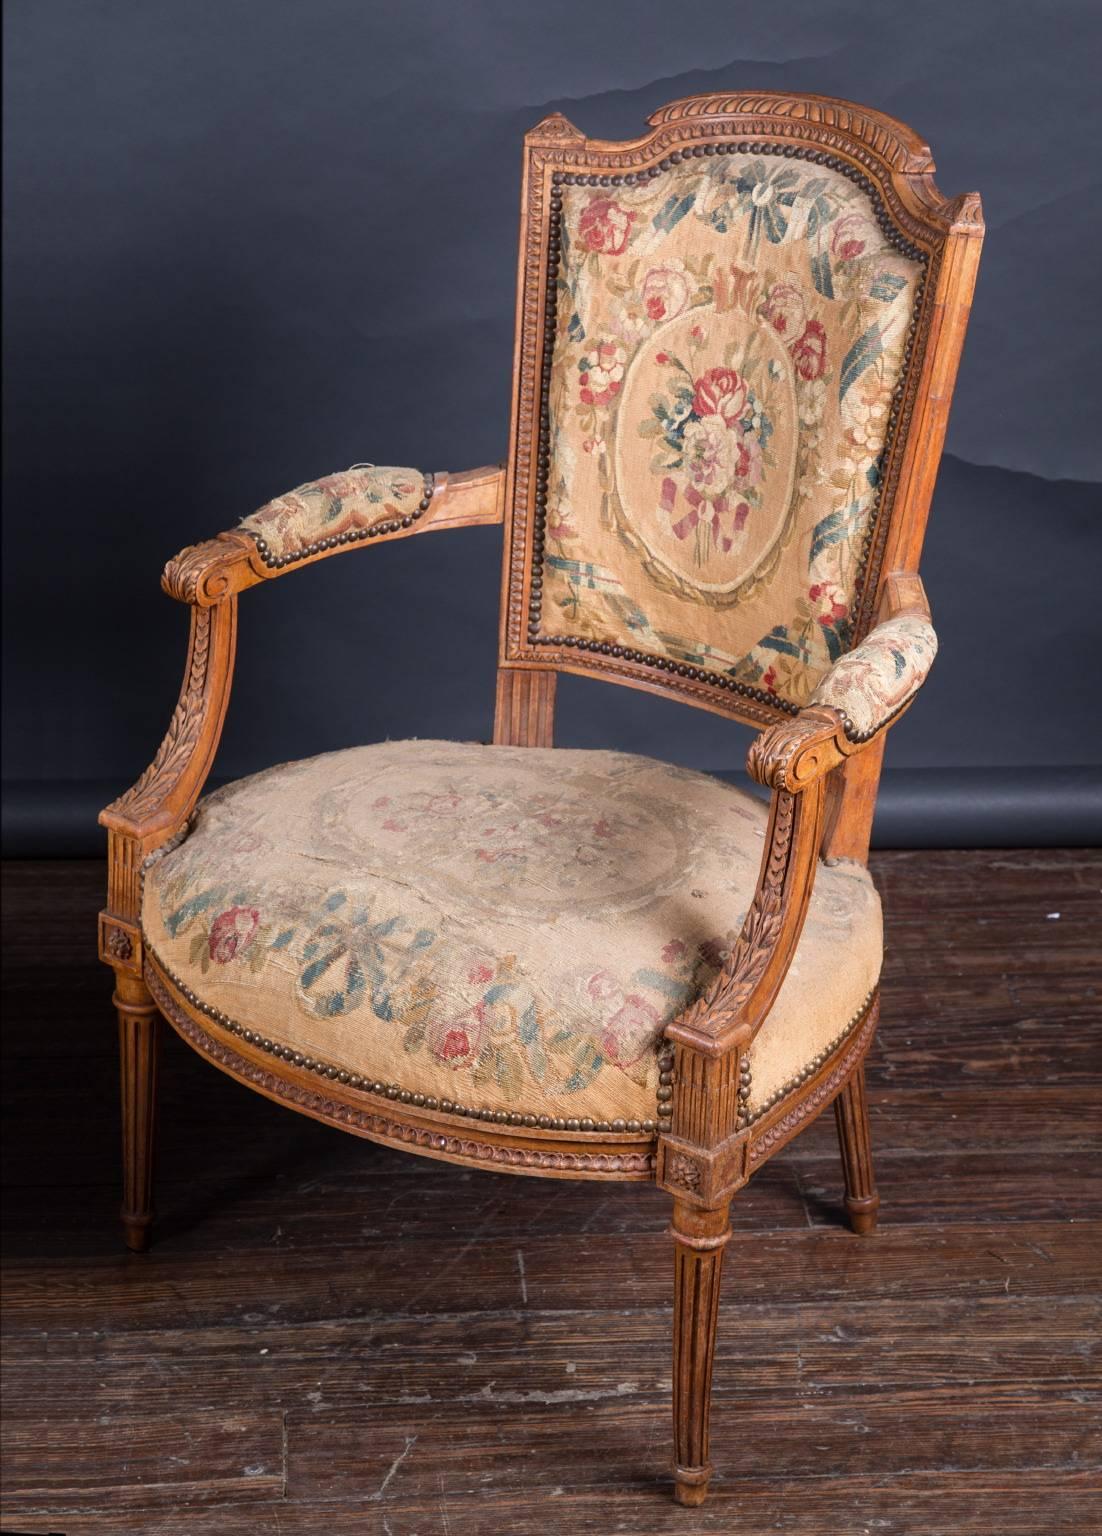 This pair of French Louis XVI open arm chairs (fauteuils) features beautifully carved walnut and dates back to the 19th century. The hand carving is truly fantastic, with delicate details found in the block marguerites, acanthus leaves and pattern